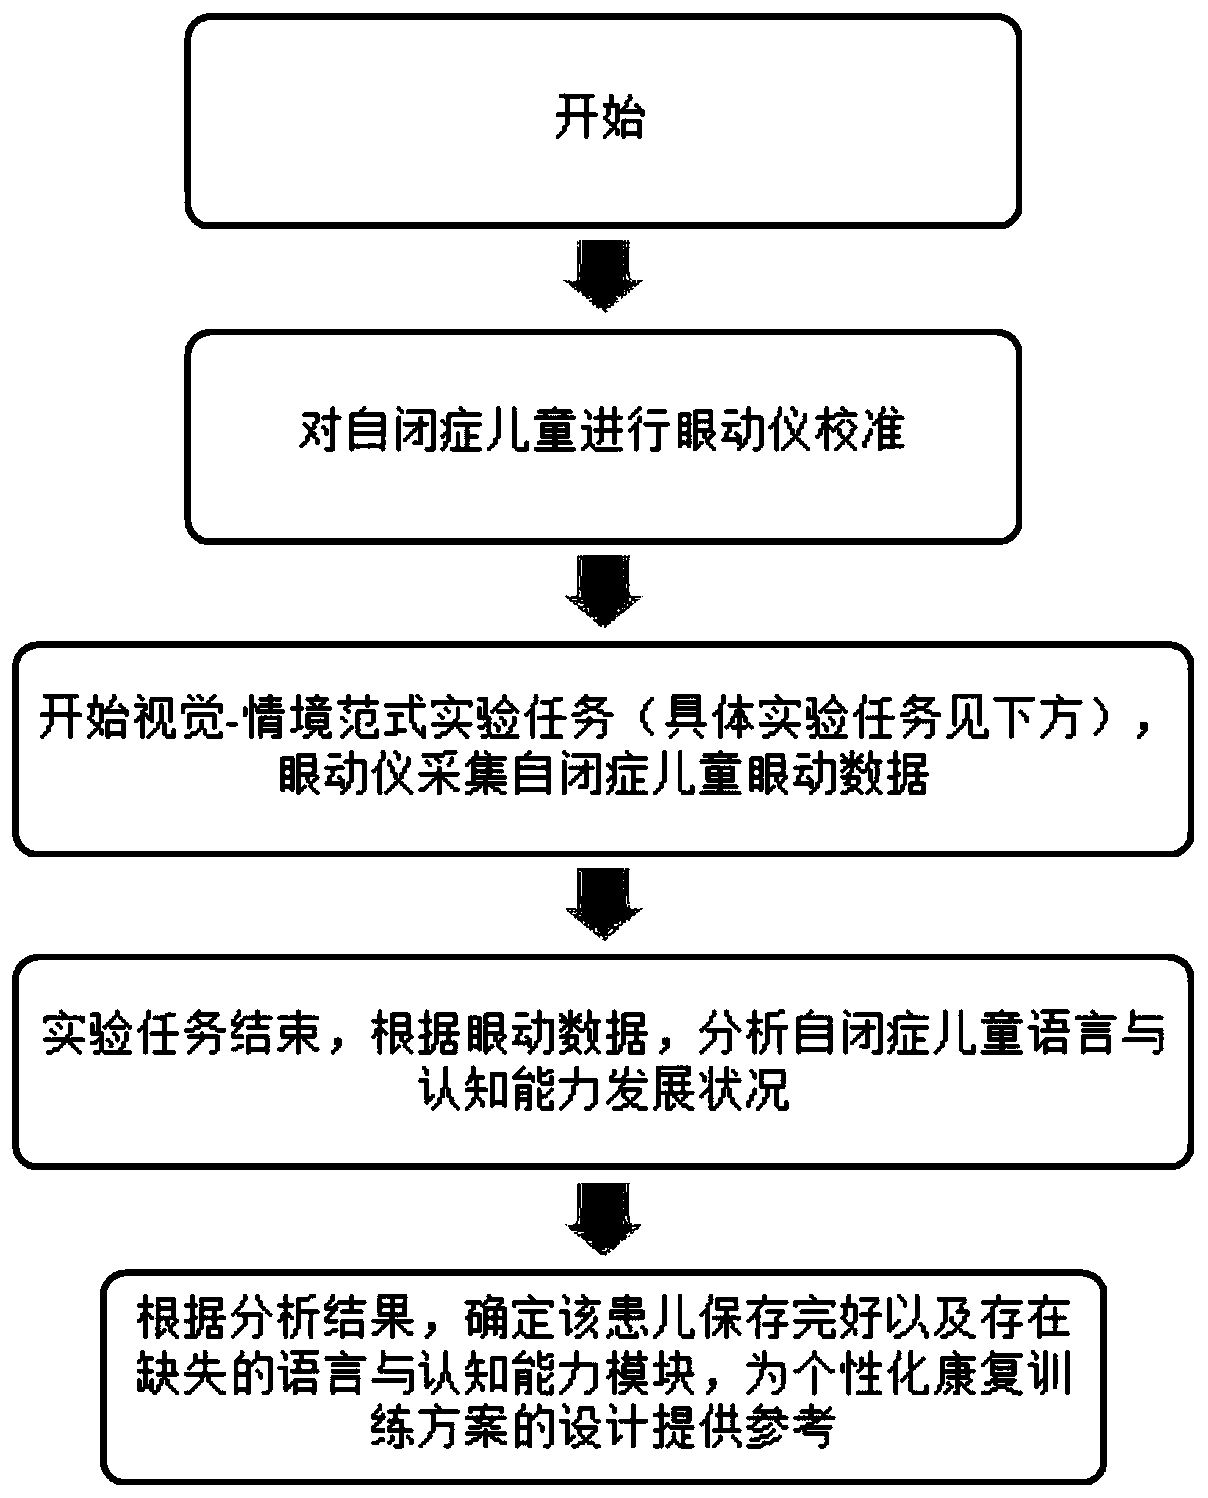 Method and device for screening early language and cognitive ability of autistic children